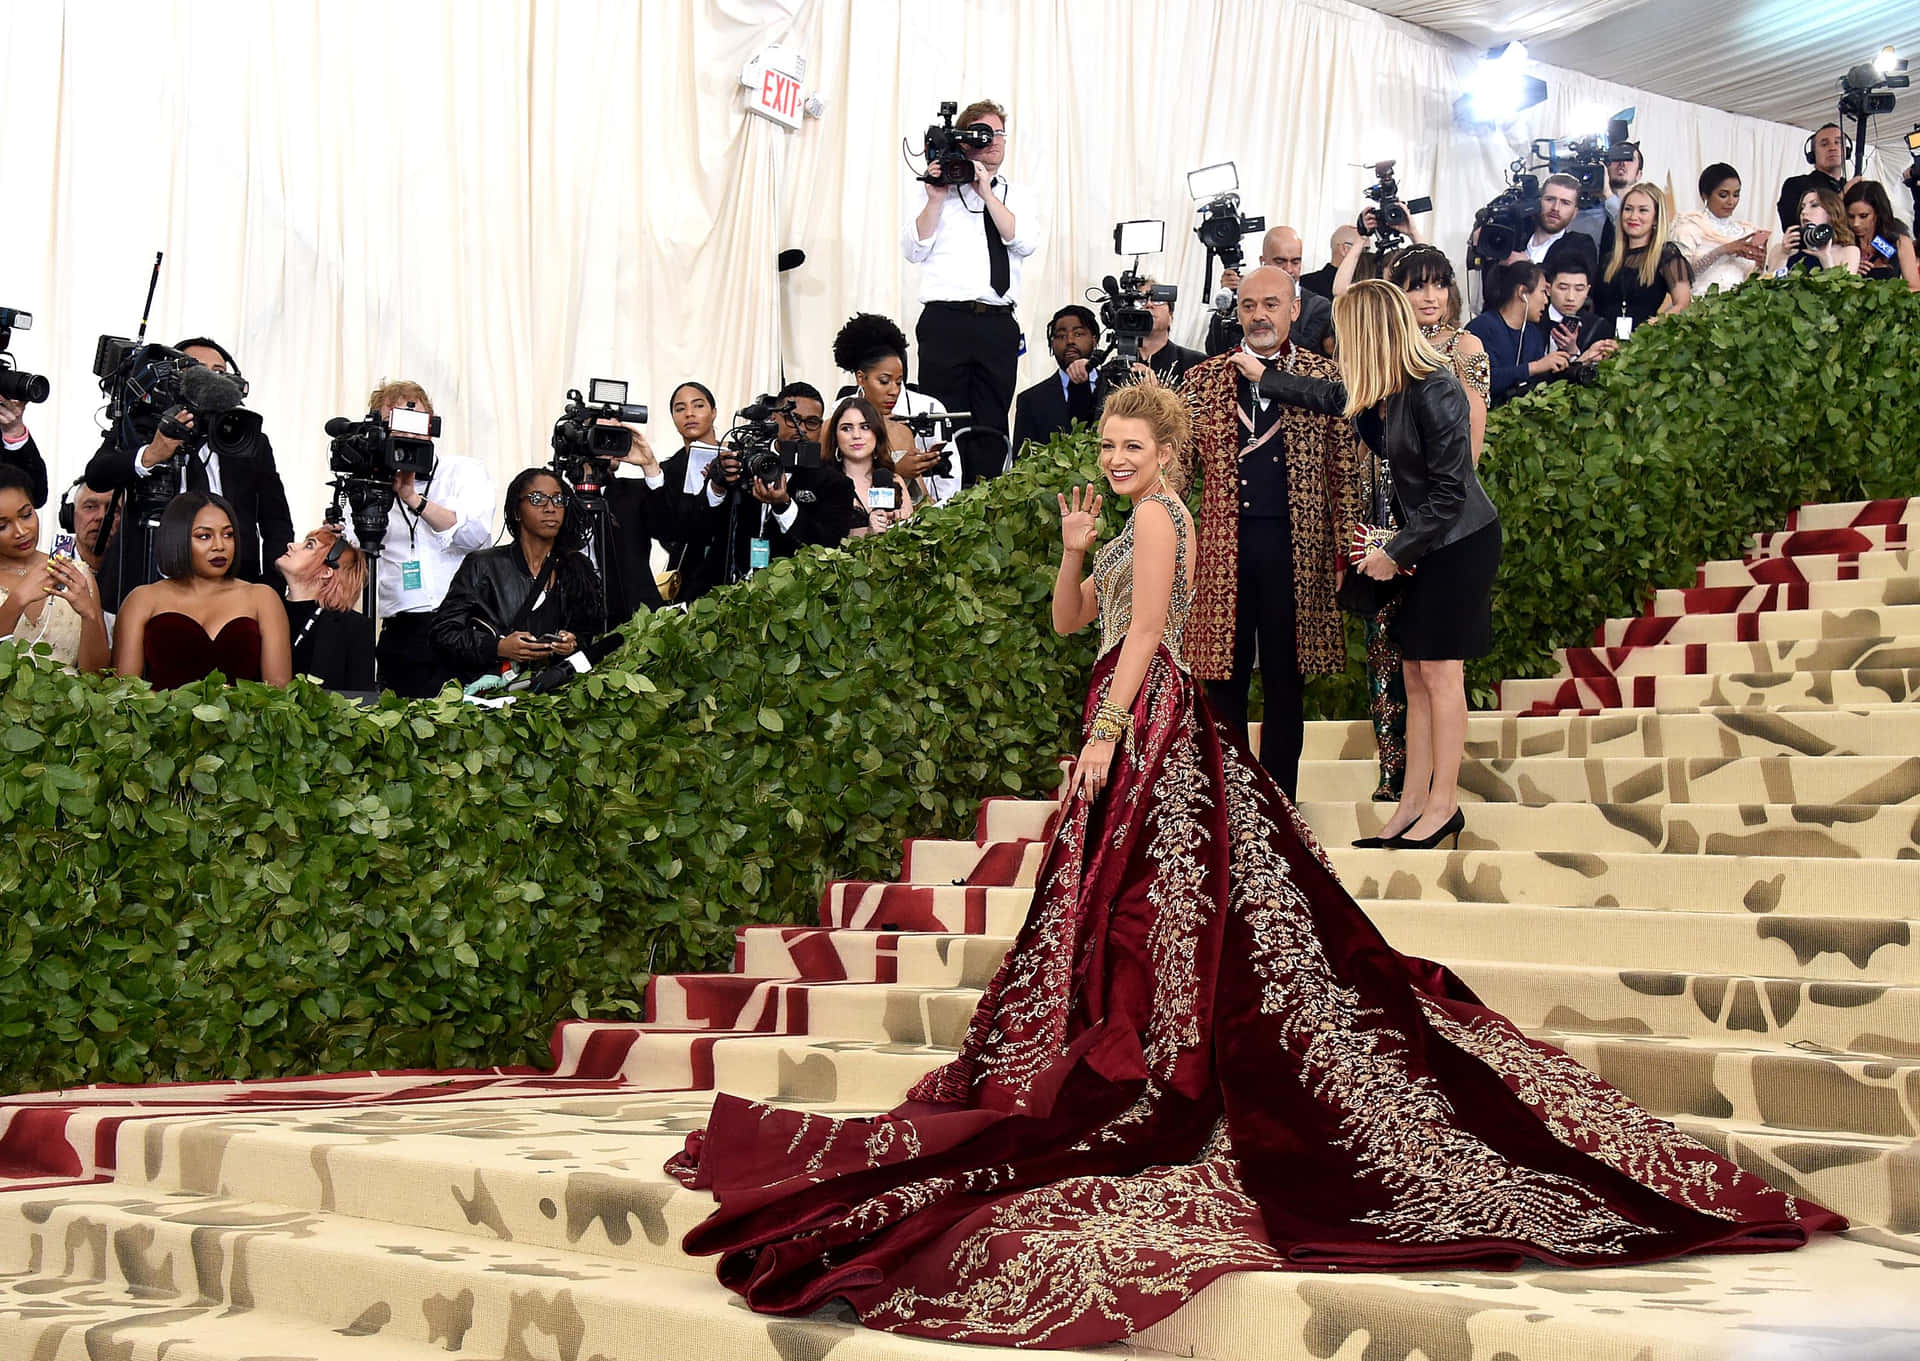 "Glitz and Glamour at the Met Gala"